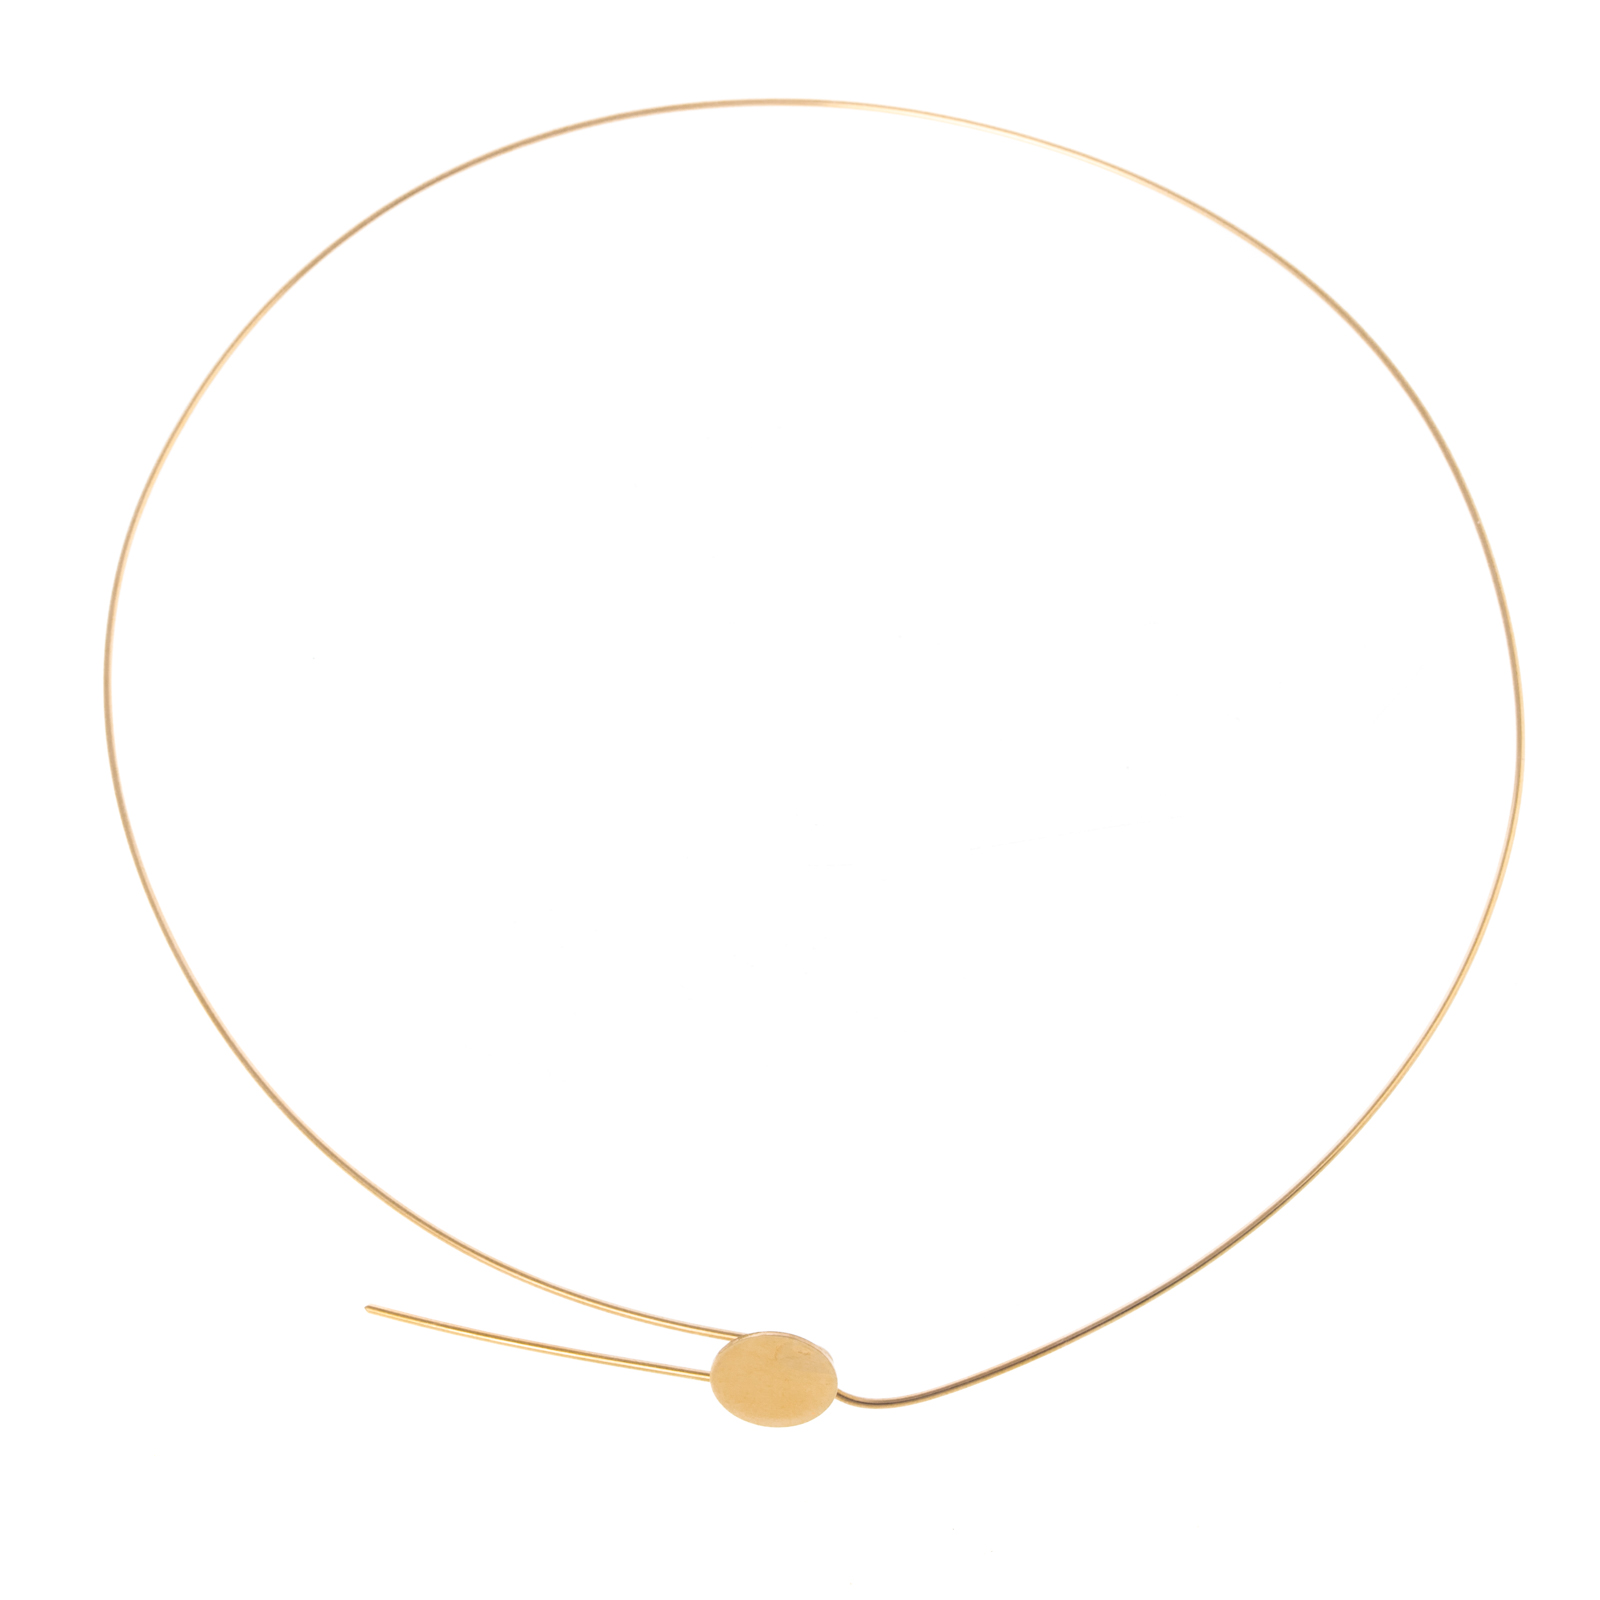 A 14K YELLOW GOLD WIRE NECKLACE